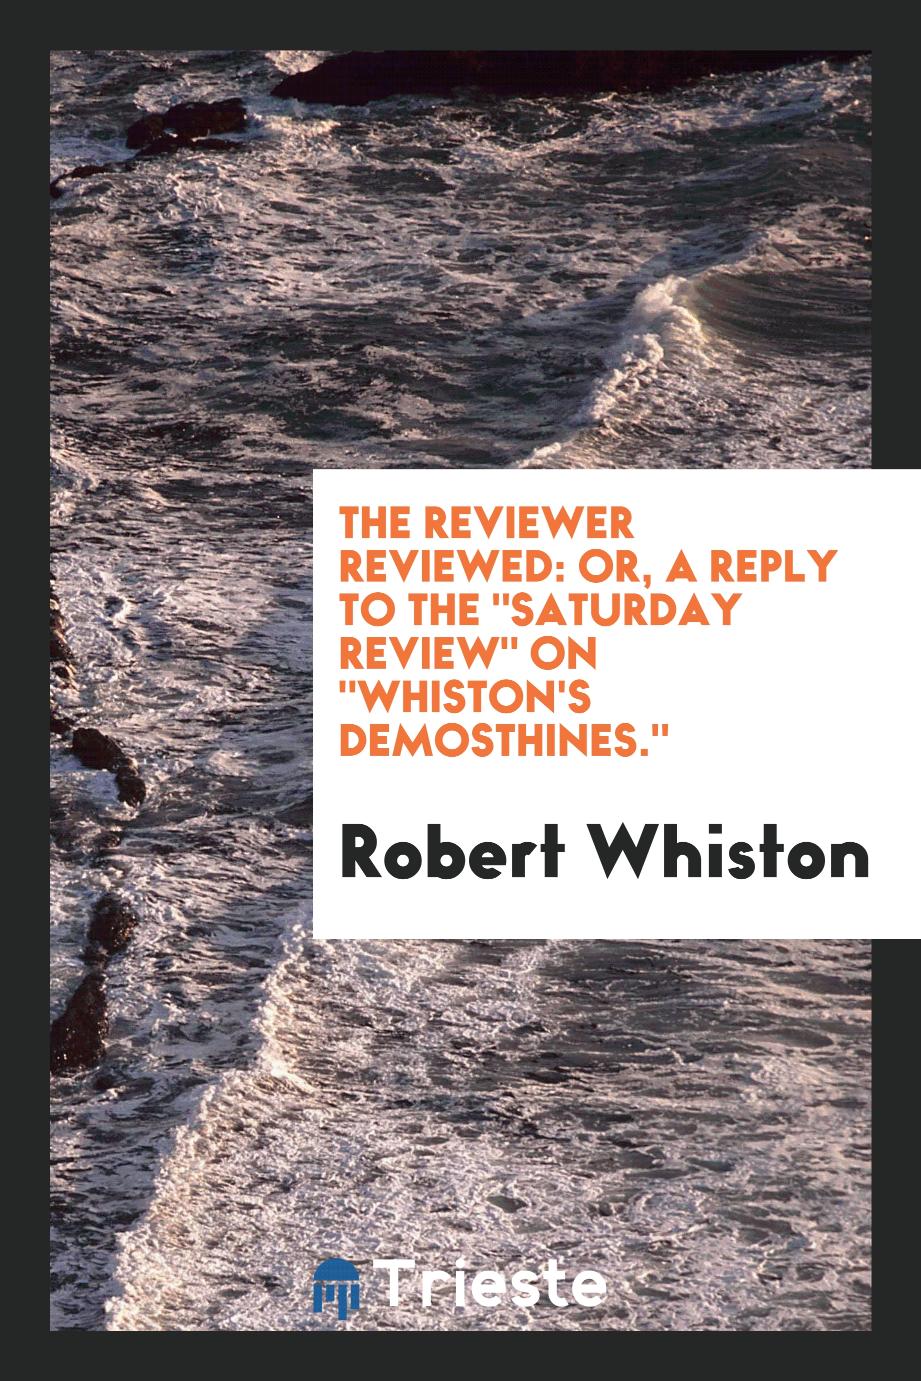 The reviewer reviewed: or, a Reply to the "Saturday review" on "Whiston's demosthines."